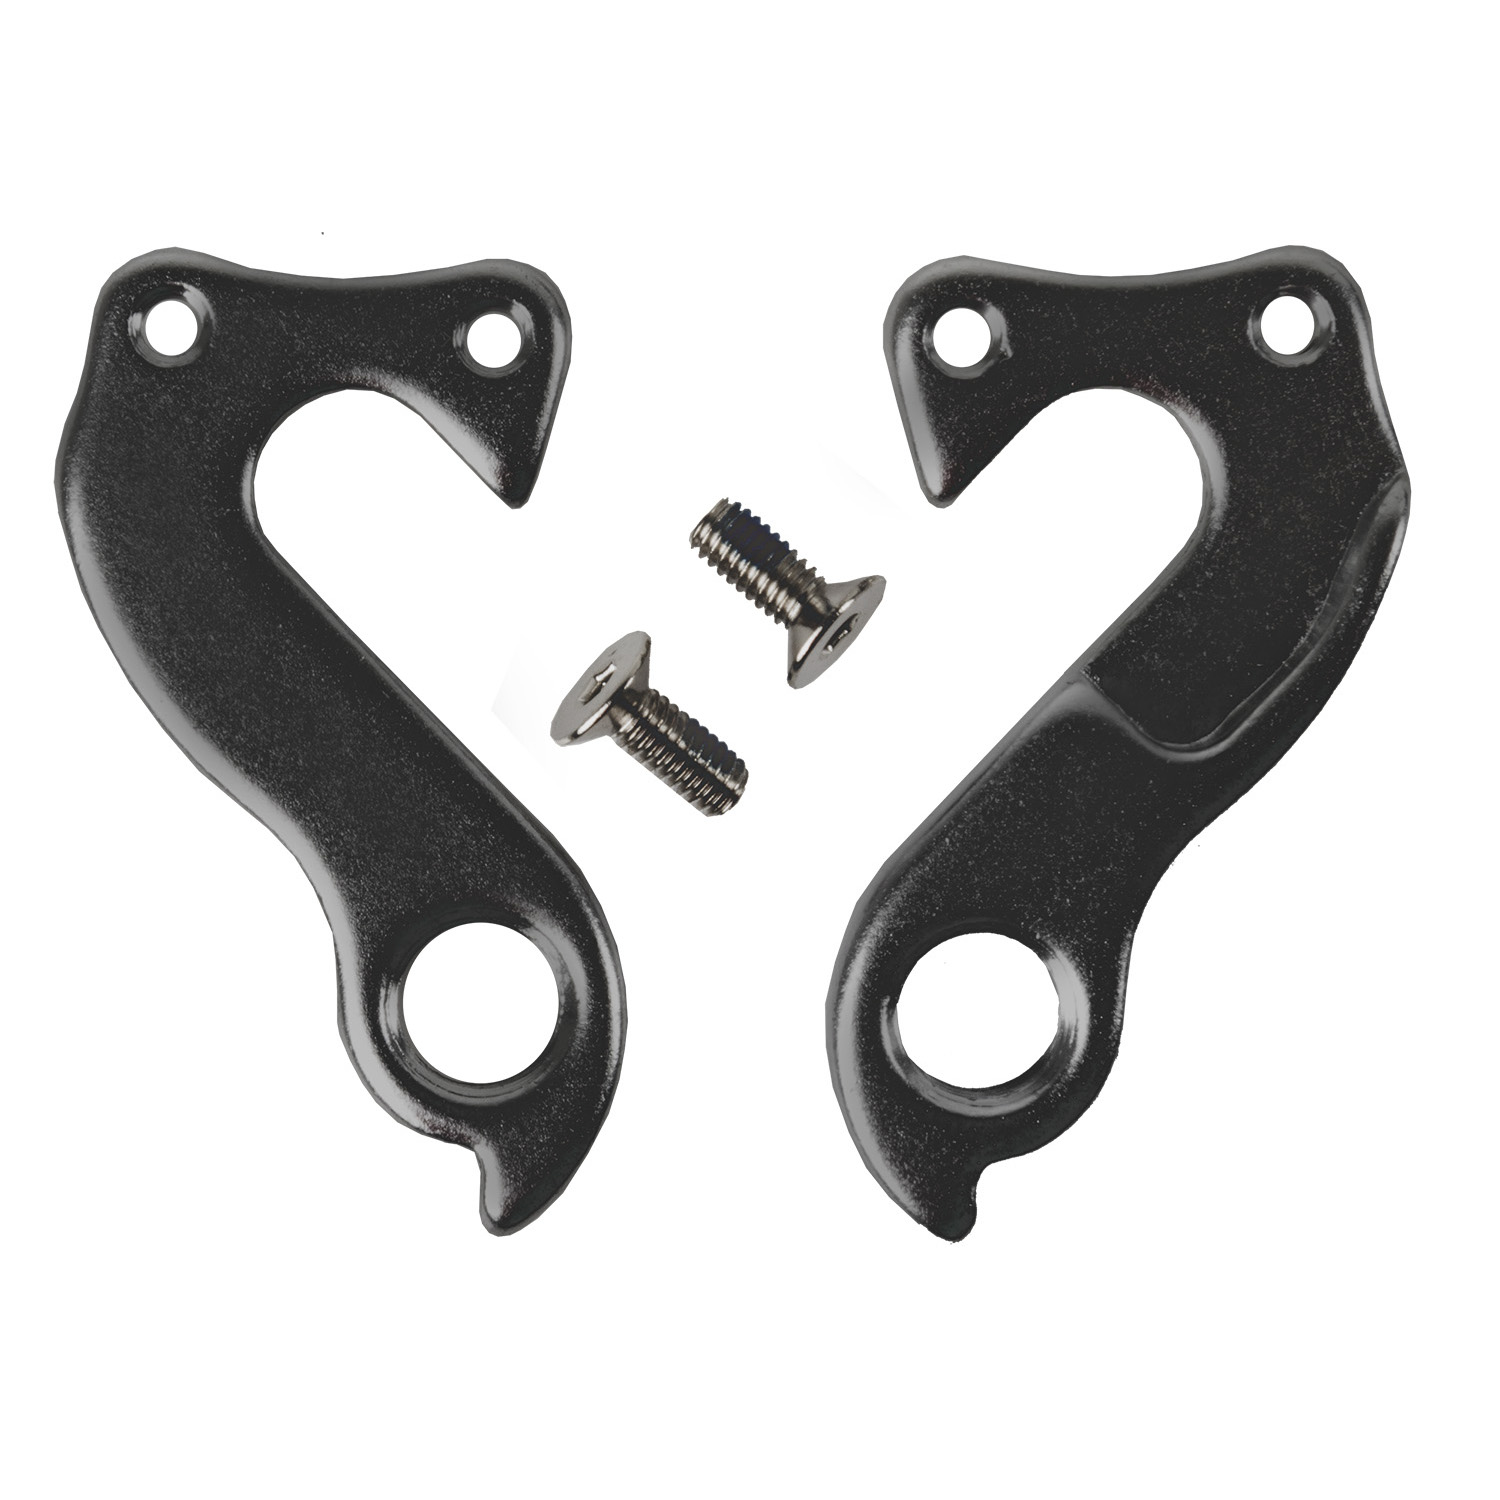 660852 B2 derailleur hanger – AVAILABLE IN SELECTED BIKE SHOPS